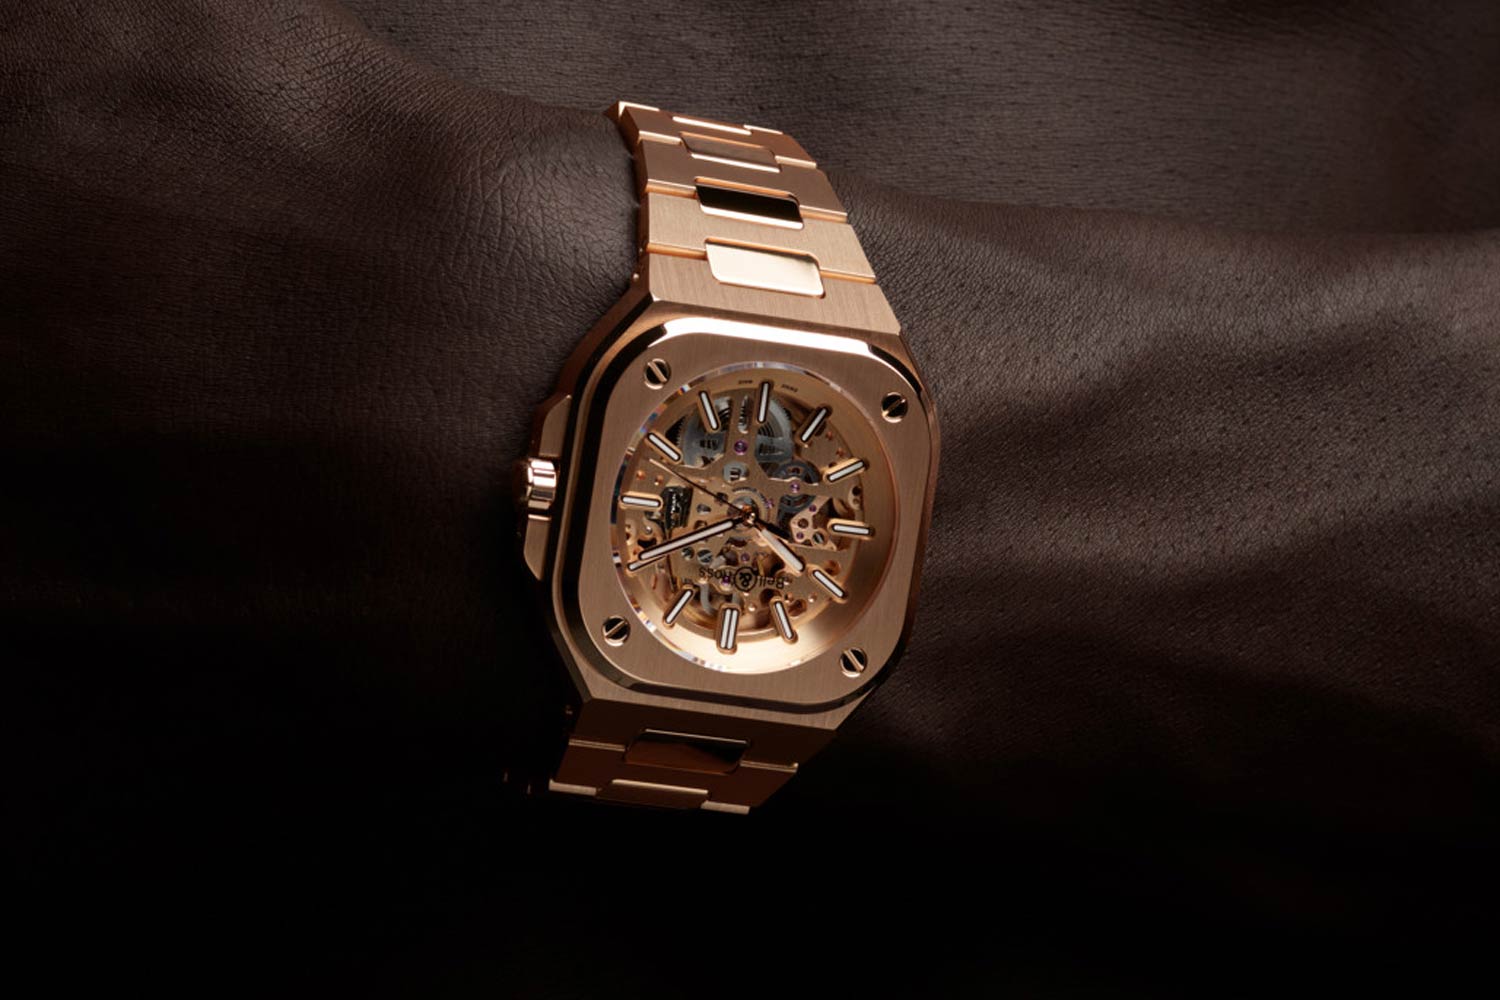 Powered by calibre BR-CAL.322, the ‘BR 05 Skeleton Gold’ is composed of 99 pieces, and totals 155 grams of gold.